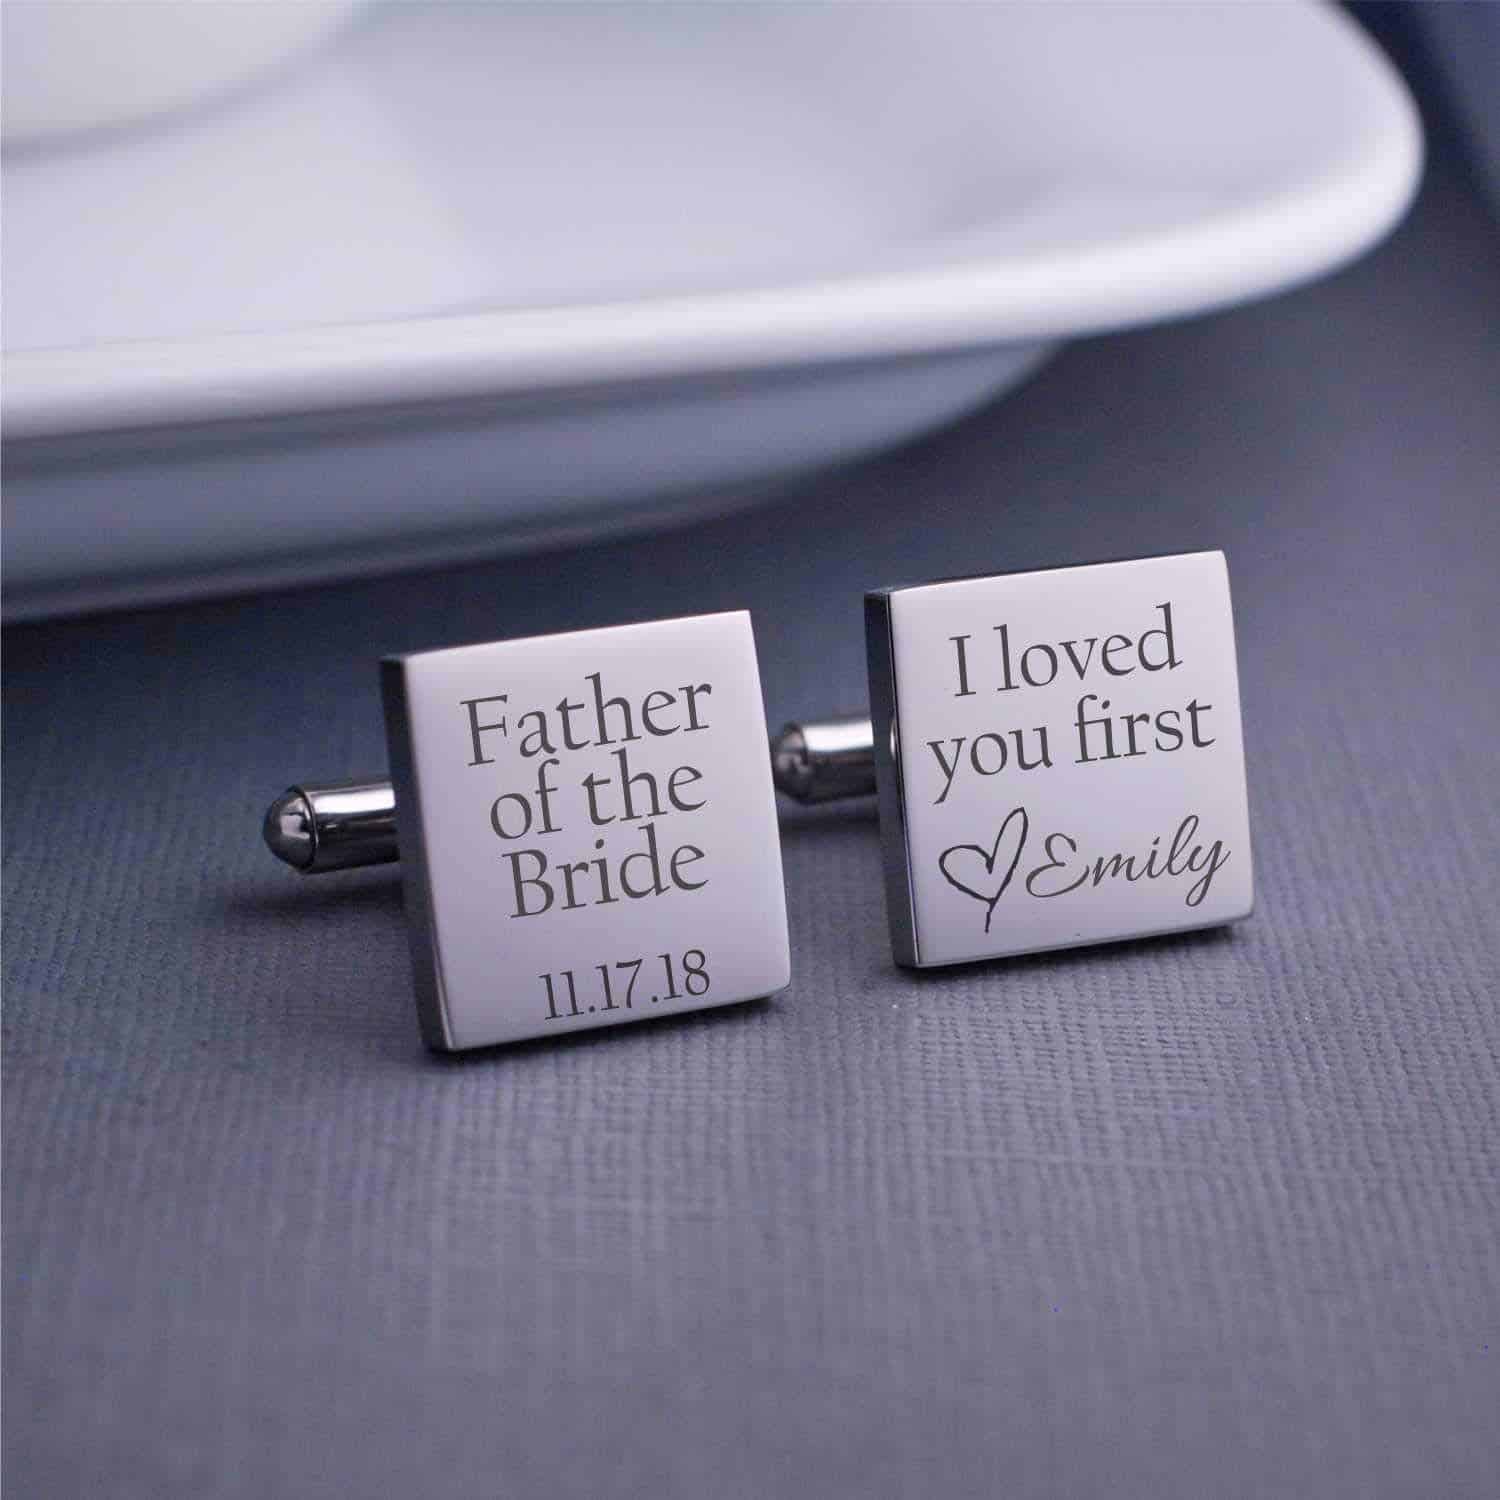 father-of-the-bride-gifts-personalized-cufflinks